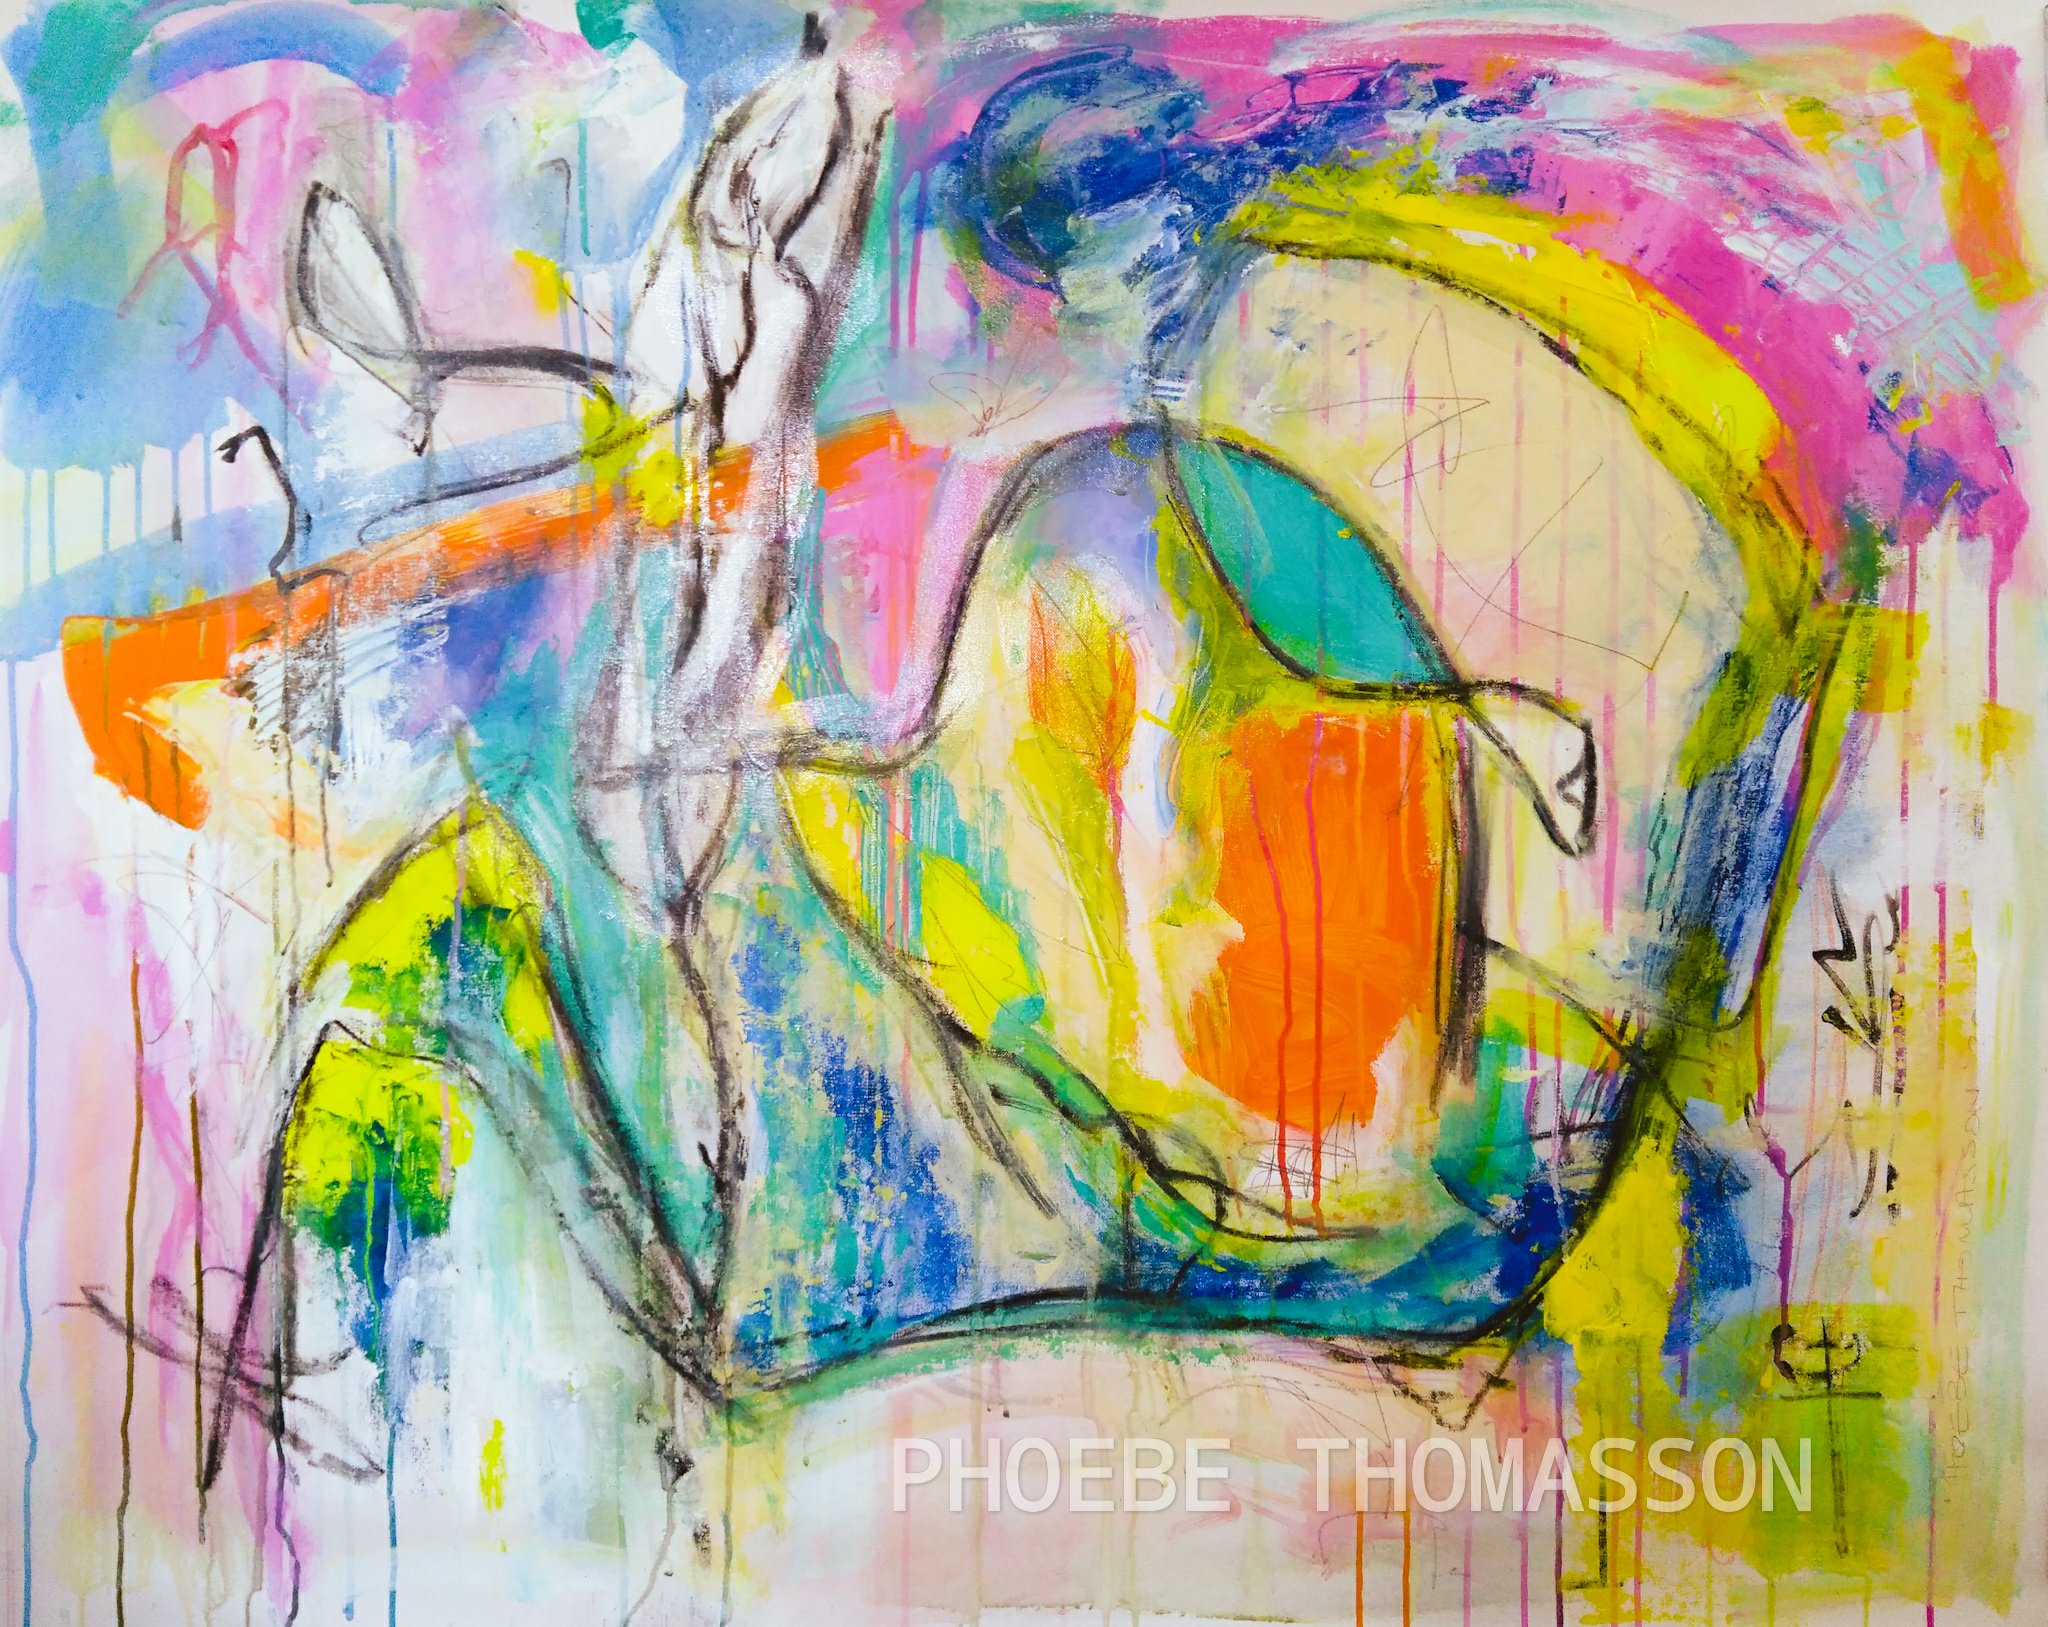 bold and dramatic yellow turquoise and orange abstract energetic abstract painting by phoebe thomasson artist uk